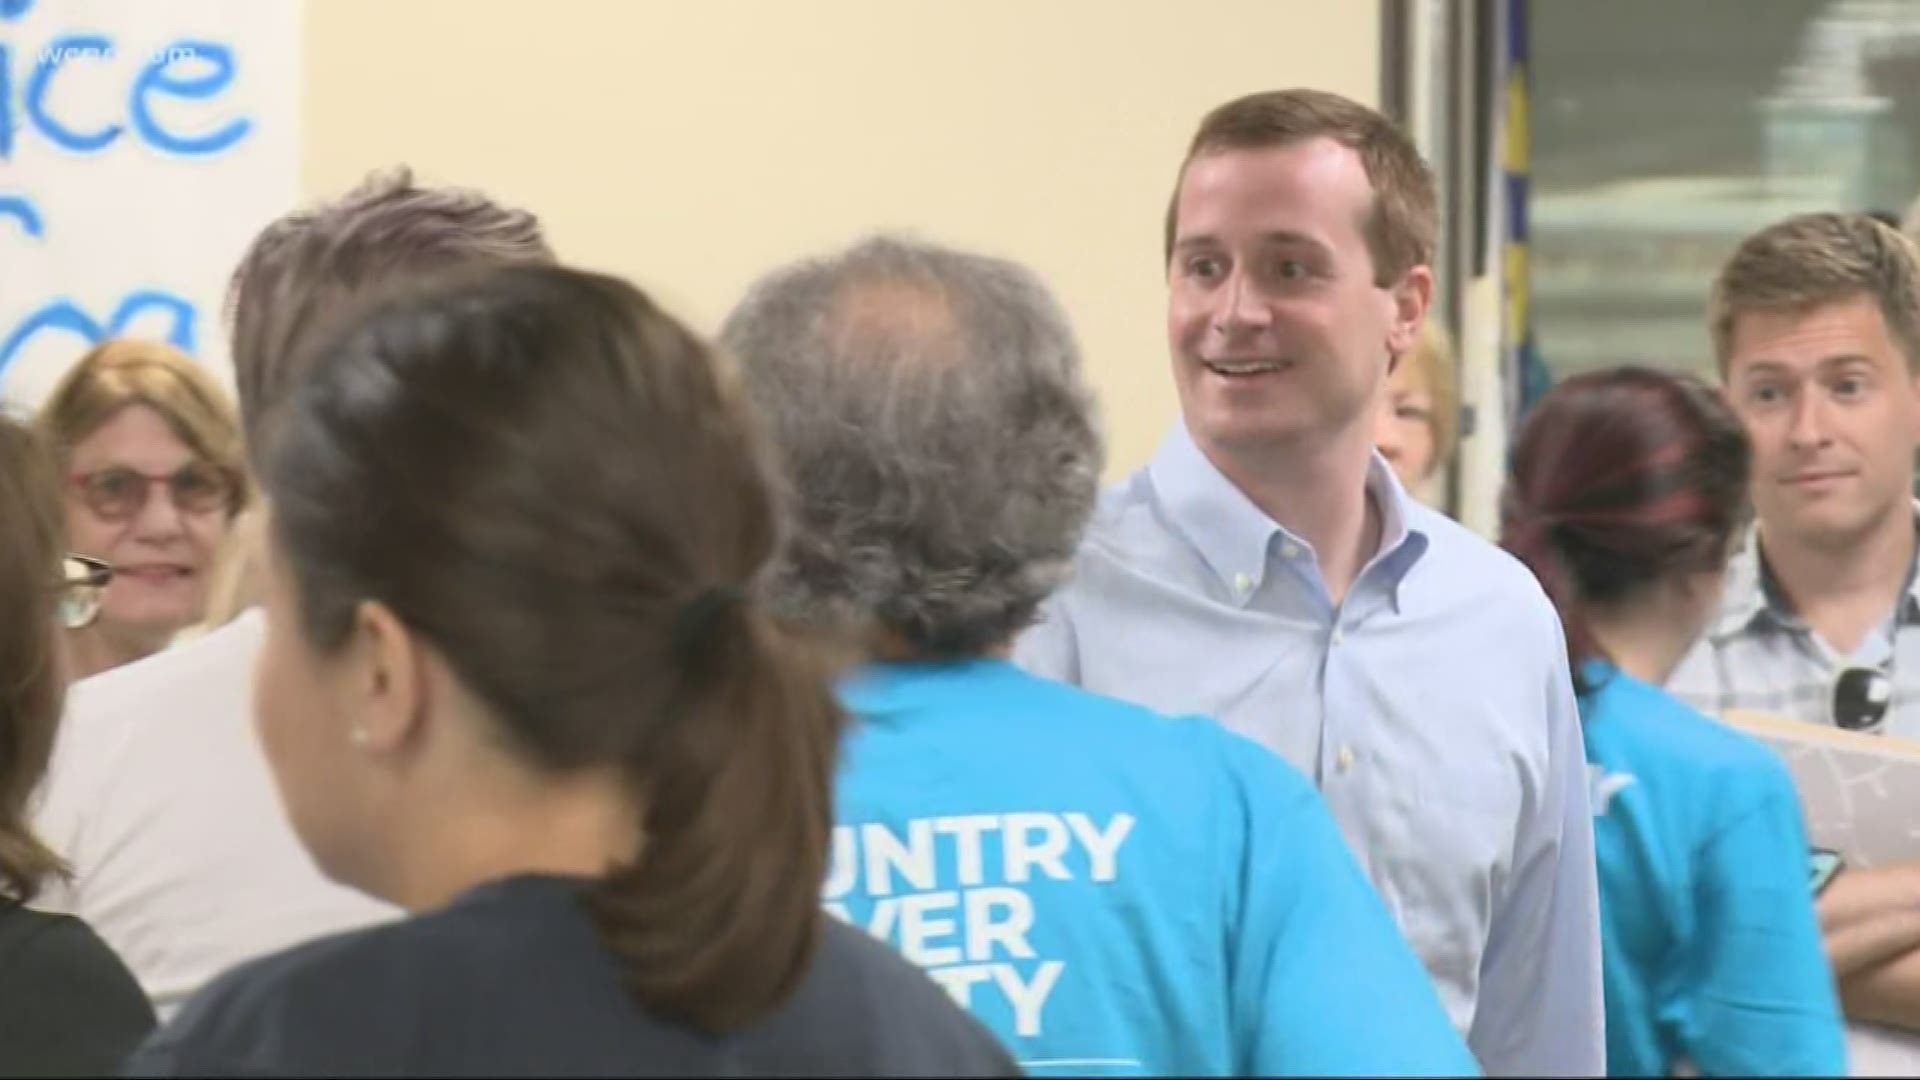 Dan McCready spent the first half of election day talking with voters in South Charlotte and Monroe, and thanking volunteers as they prepared to spend the afternoon knocking on doors, urging people to get out and vote.